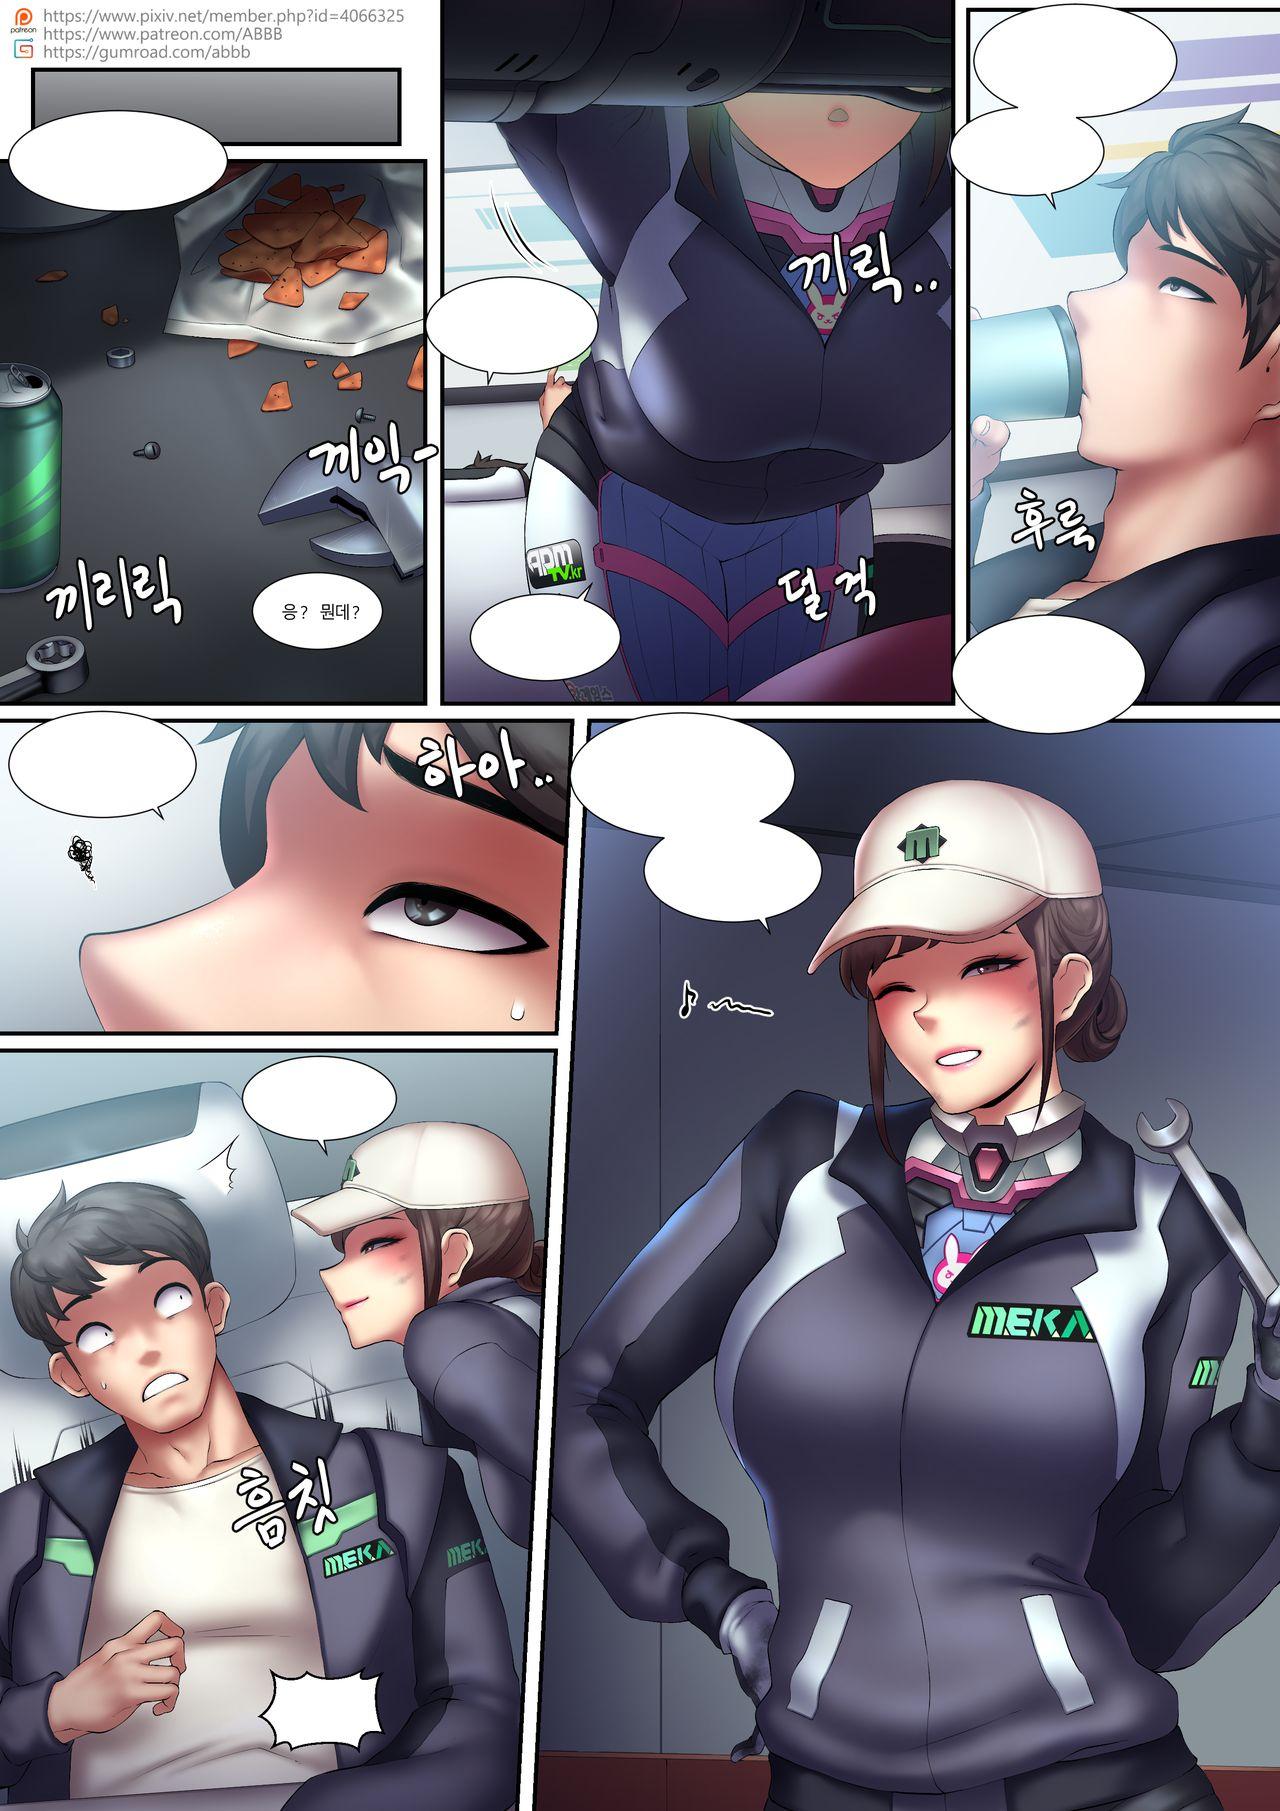 Euro Shooting Star - Overwatch Reverse Cowgirl - Page 2